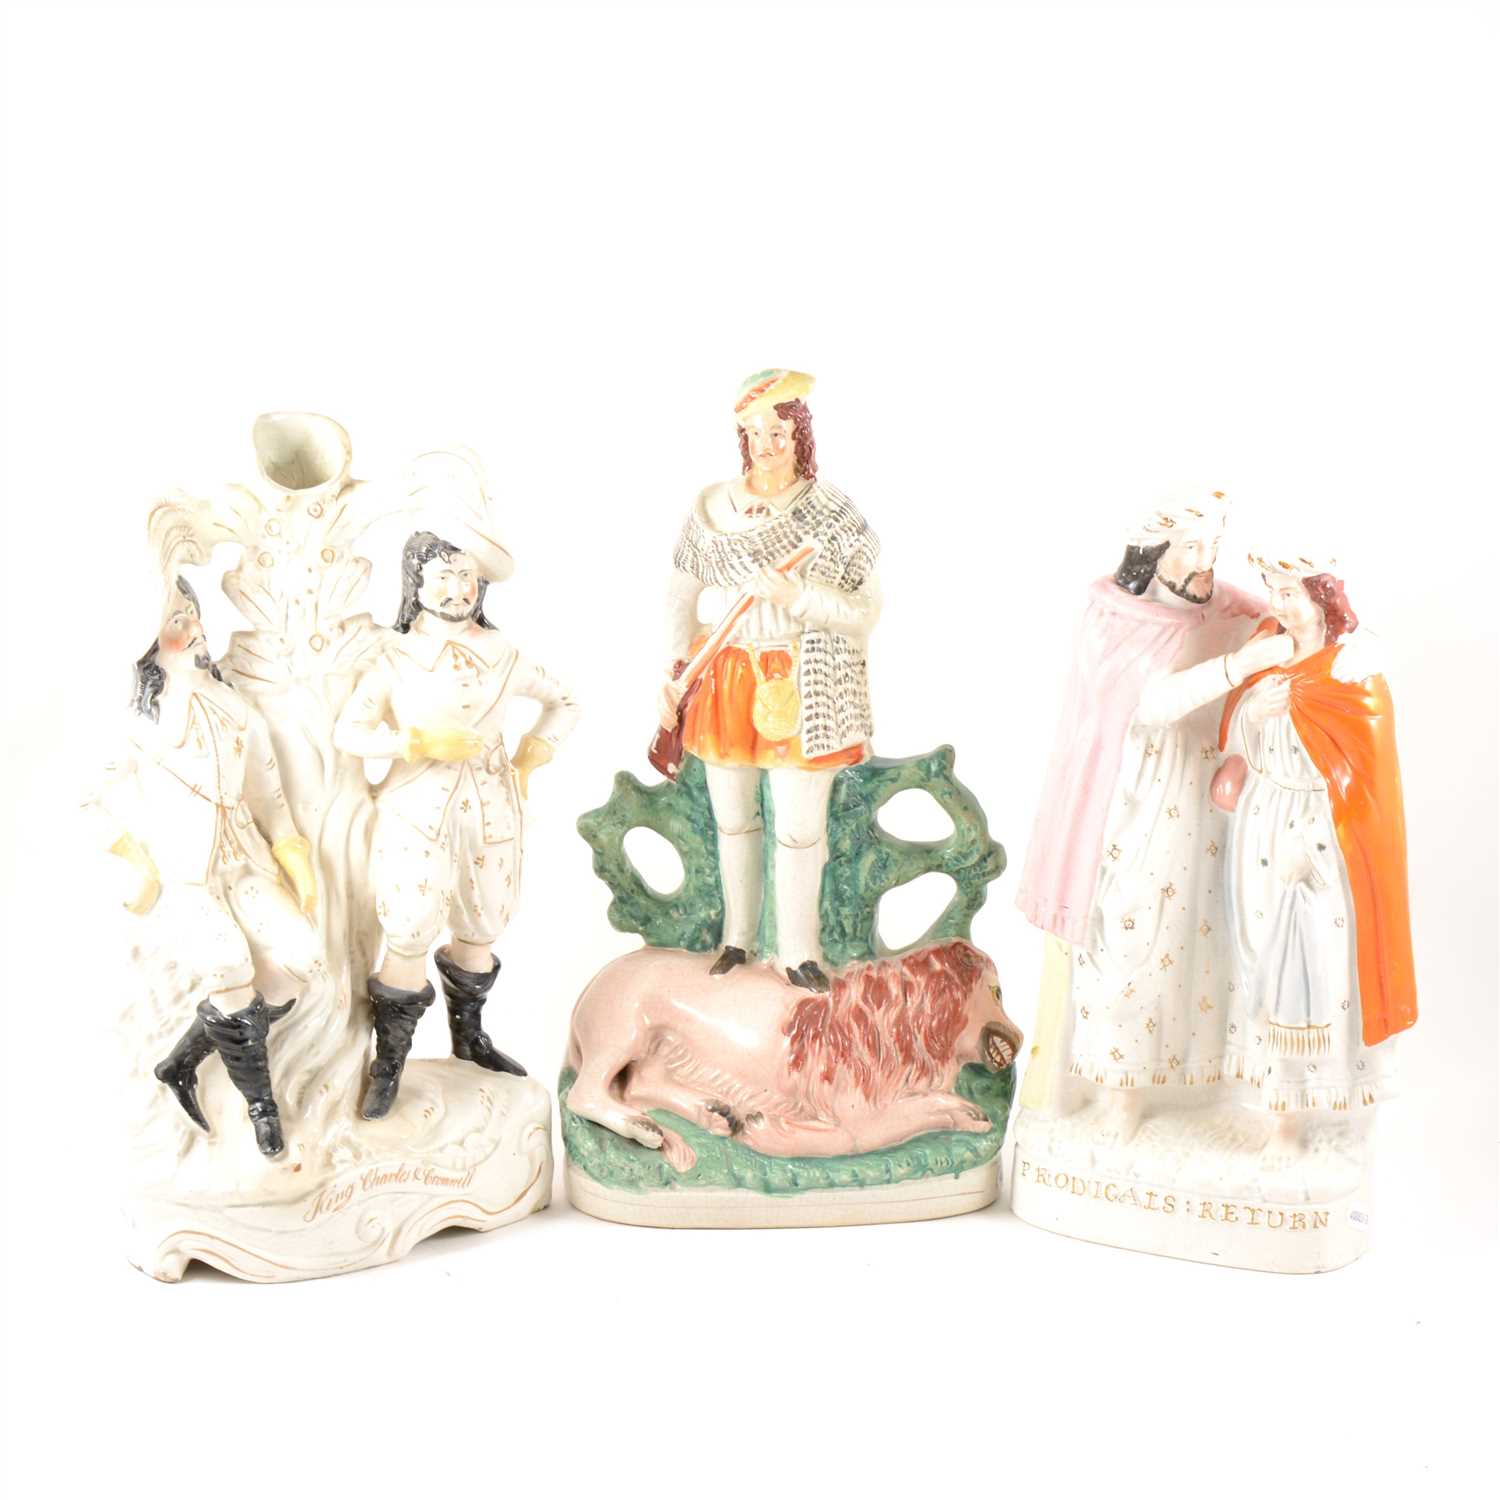 Lot 34 - A Staffordshire group, Prodigals Return, and six other Staffordshire figures.